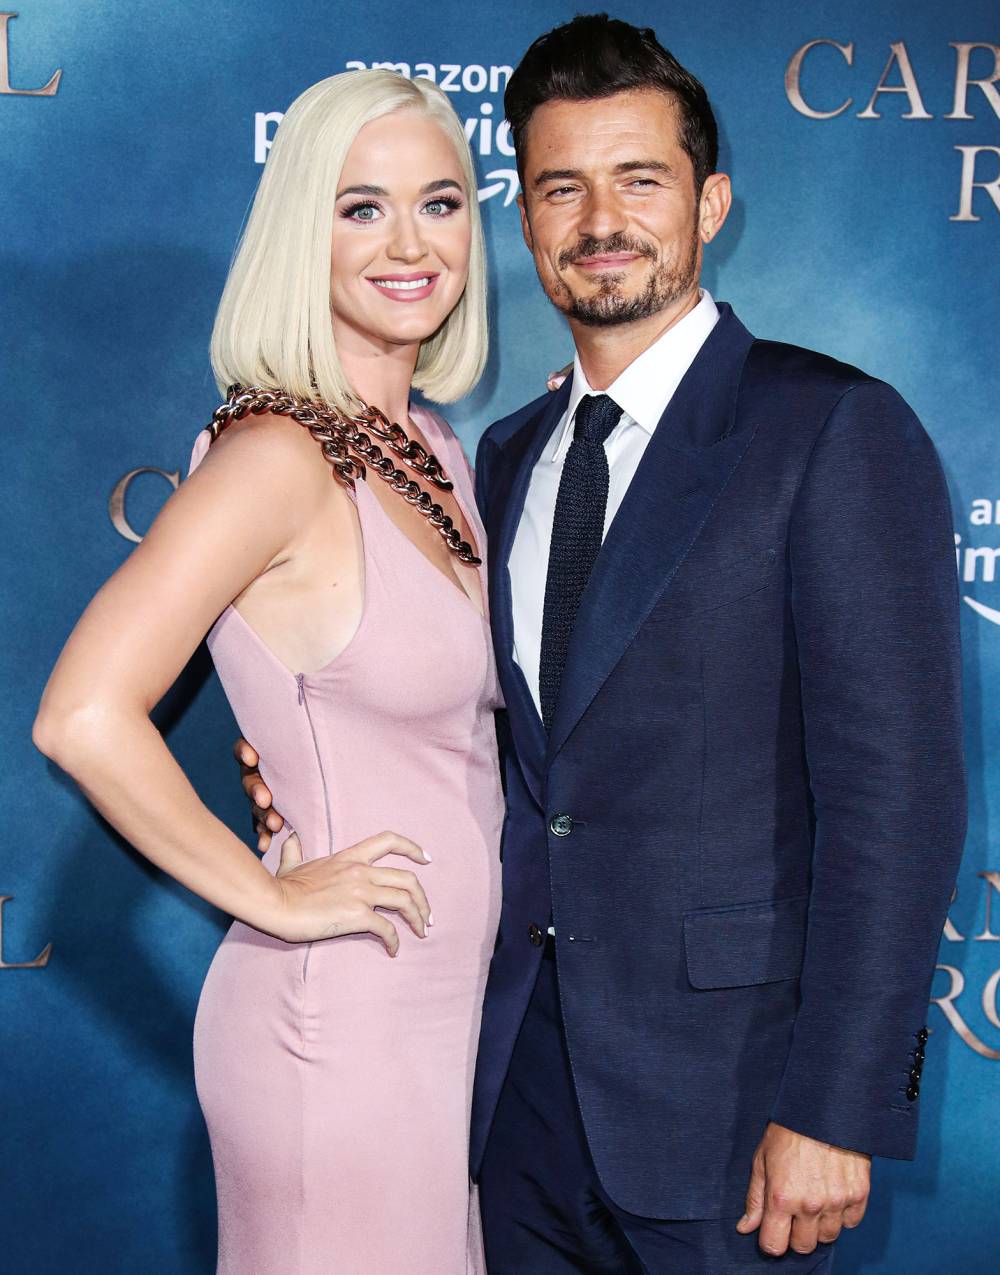 Katy Perry and Orlando Bloom attend the premiere of Carnival Row Katy Perry and Orlando Bloom Buy 14.2 Million Montecito Mansion After Welcoming Daughter Daisy